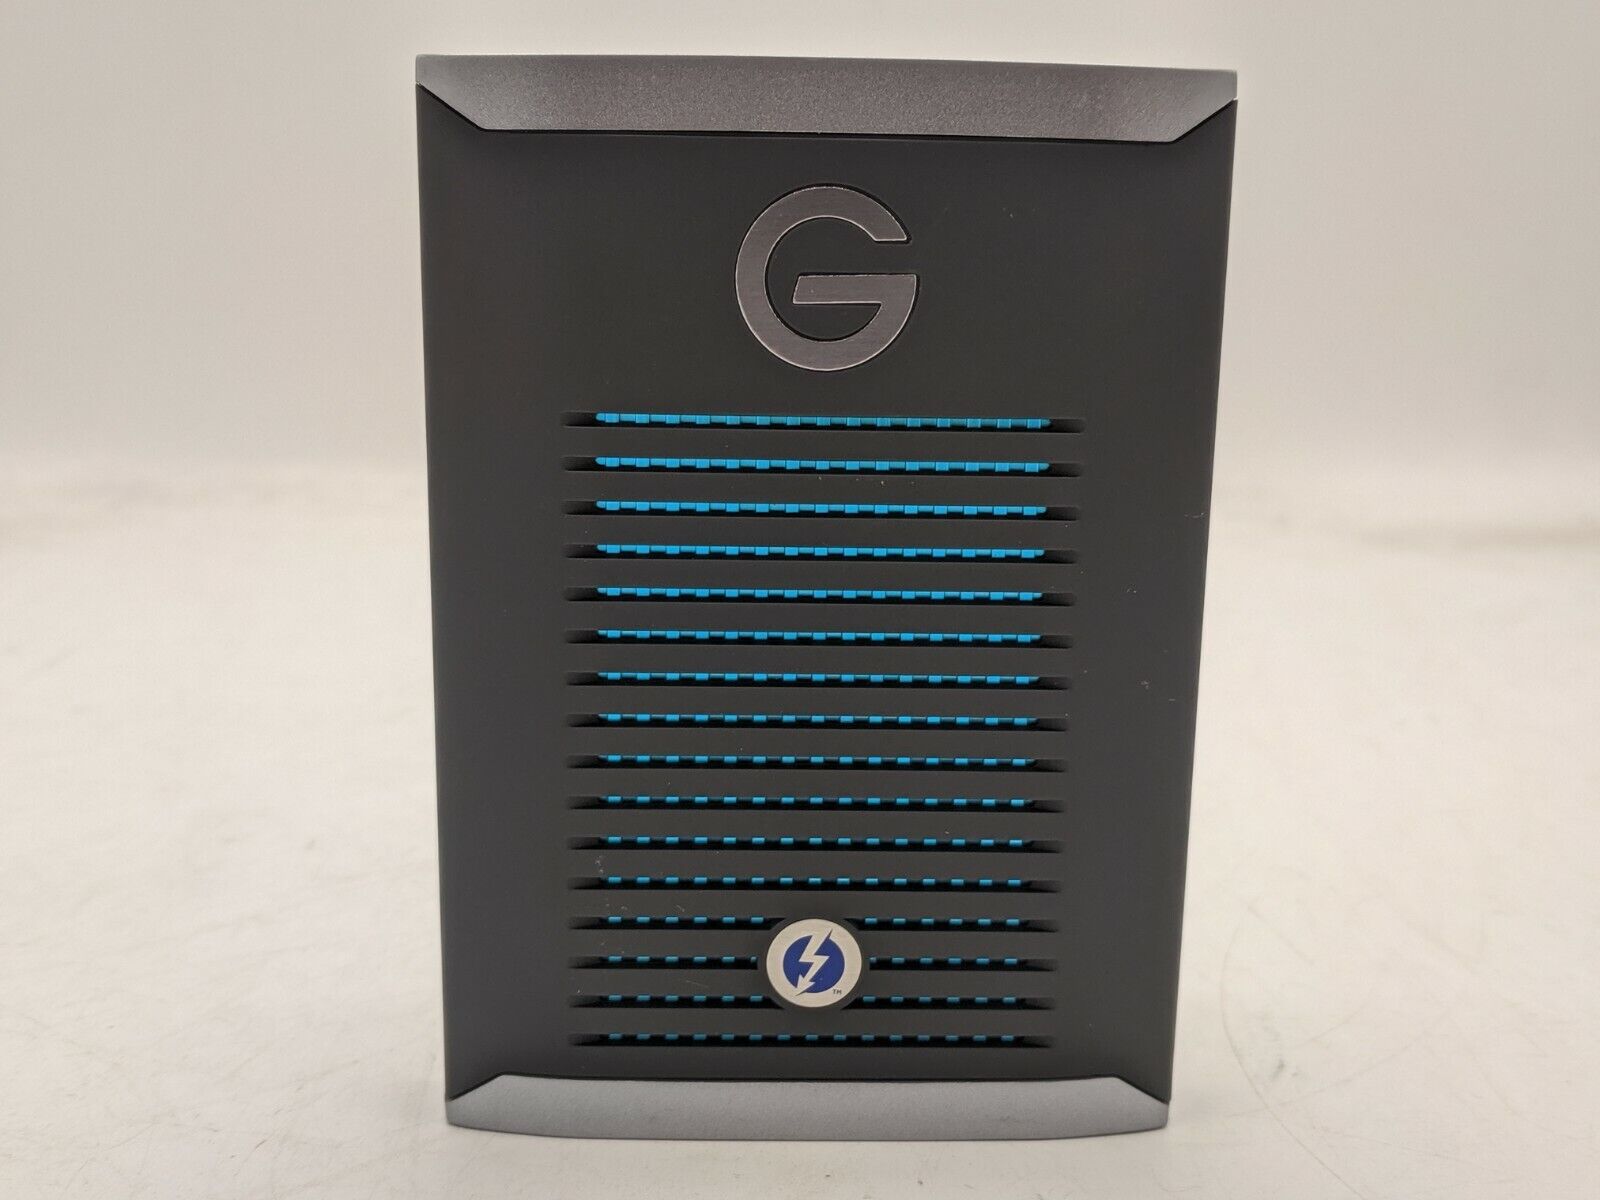 G-TECHNOLOGY G-DRIVE MOBILE PRO 500GB 2.5" (0G10310-1) USB 3.0 *TESTED/WORKING*